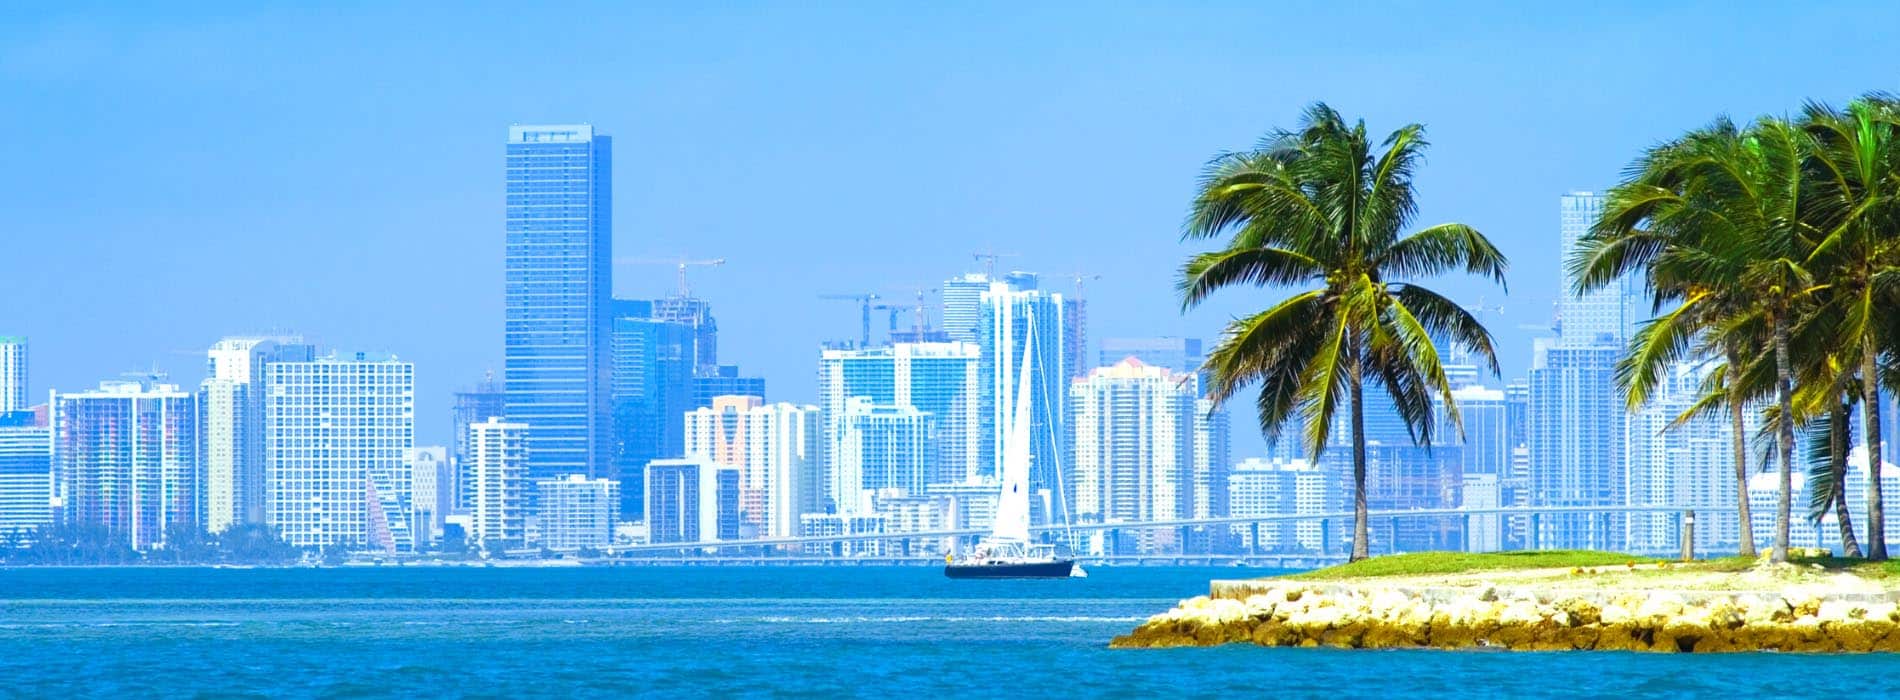 View of Miami Skyline across the Ocean with skyscrapers and a boat in the water